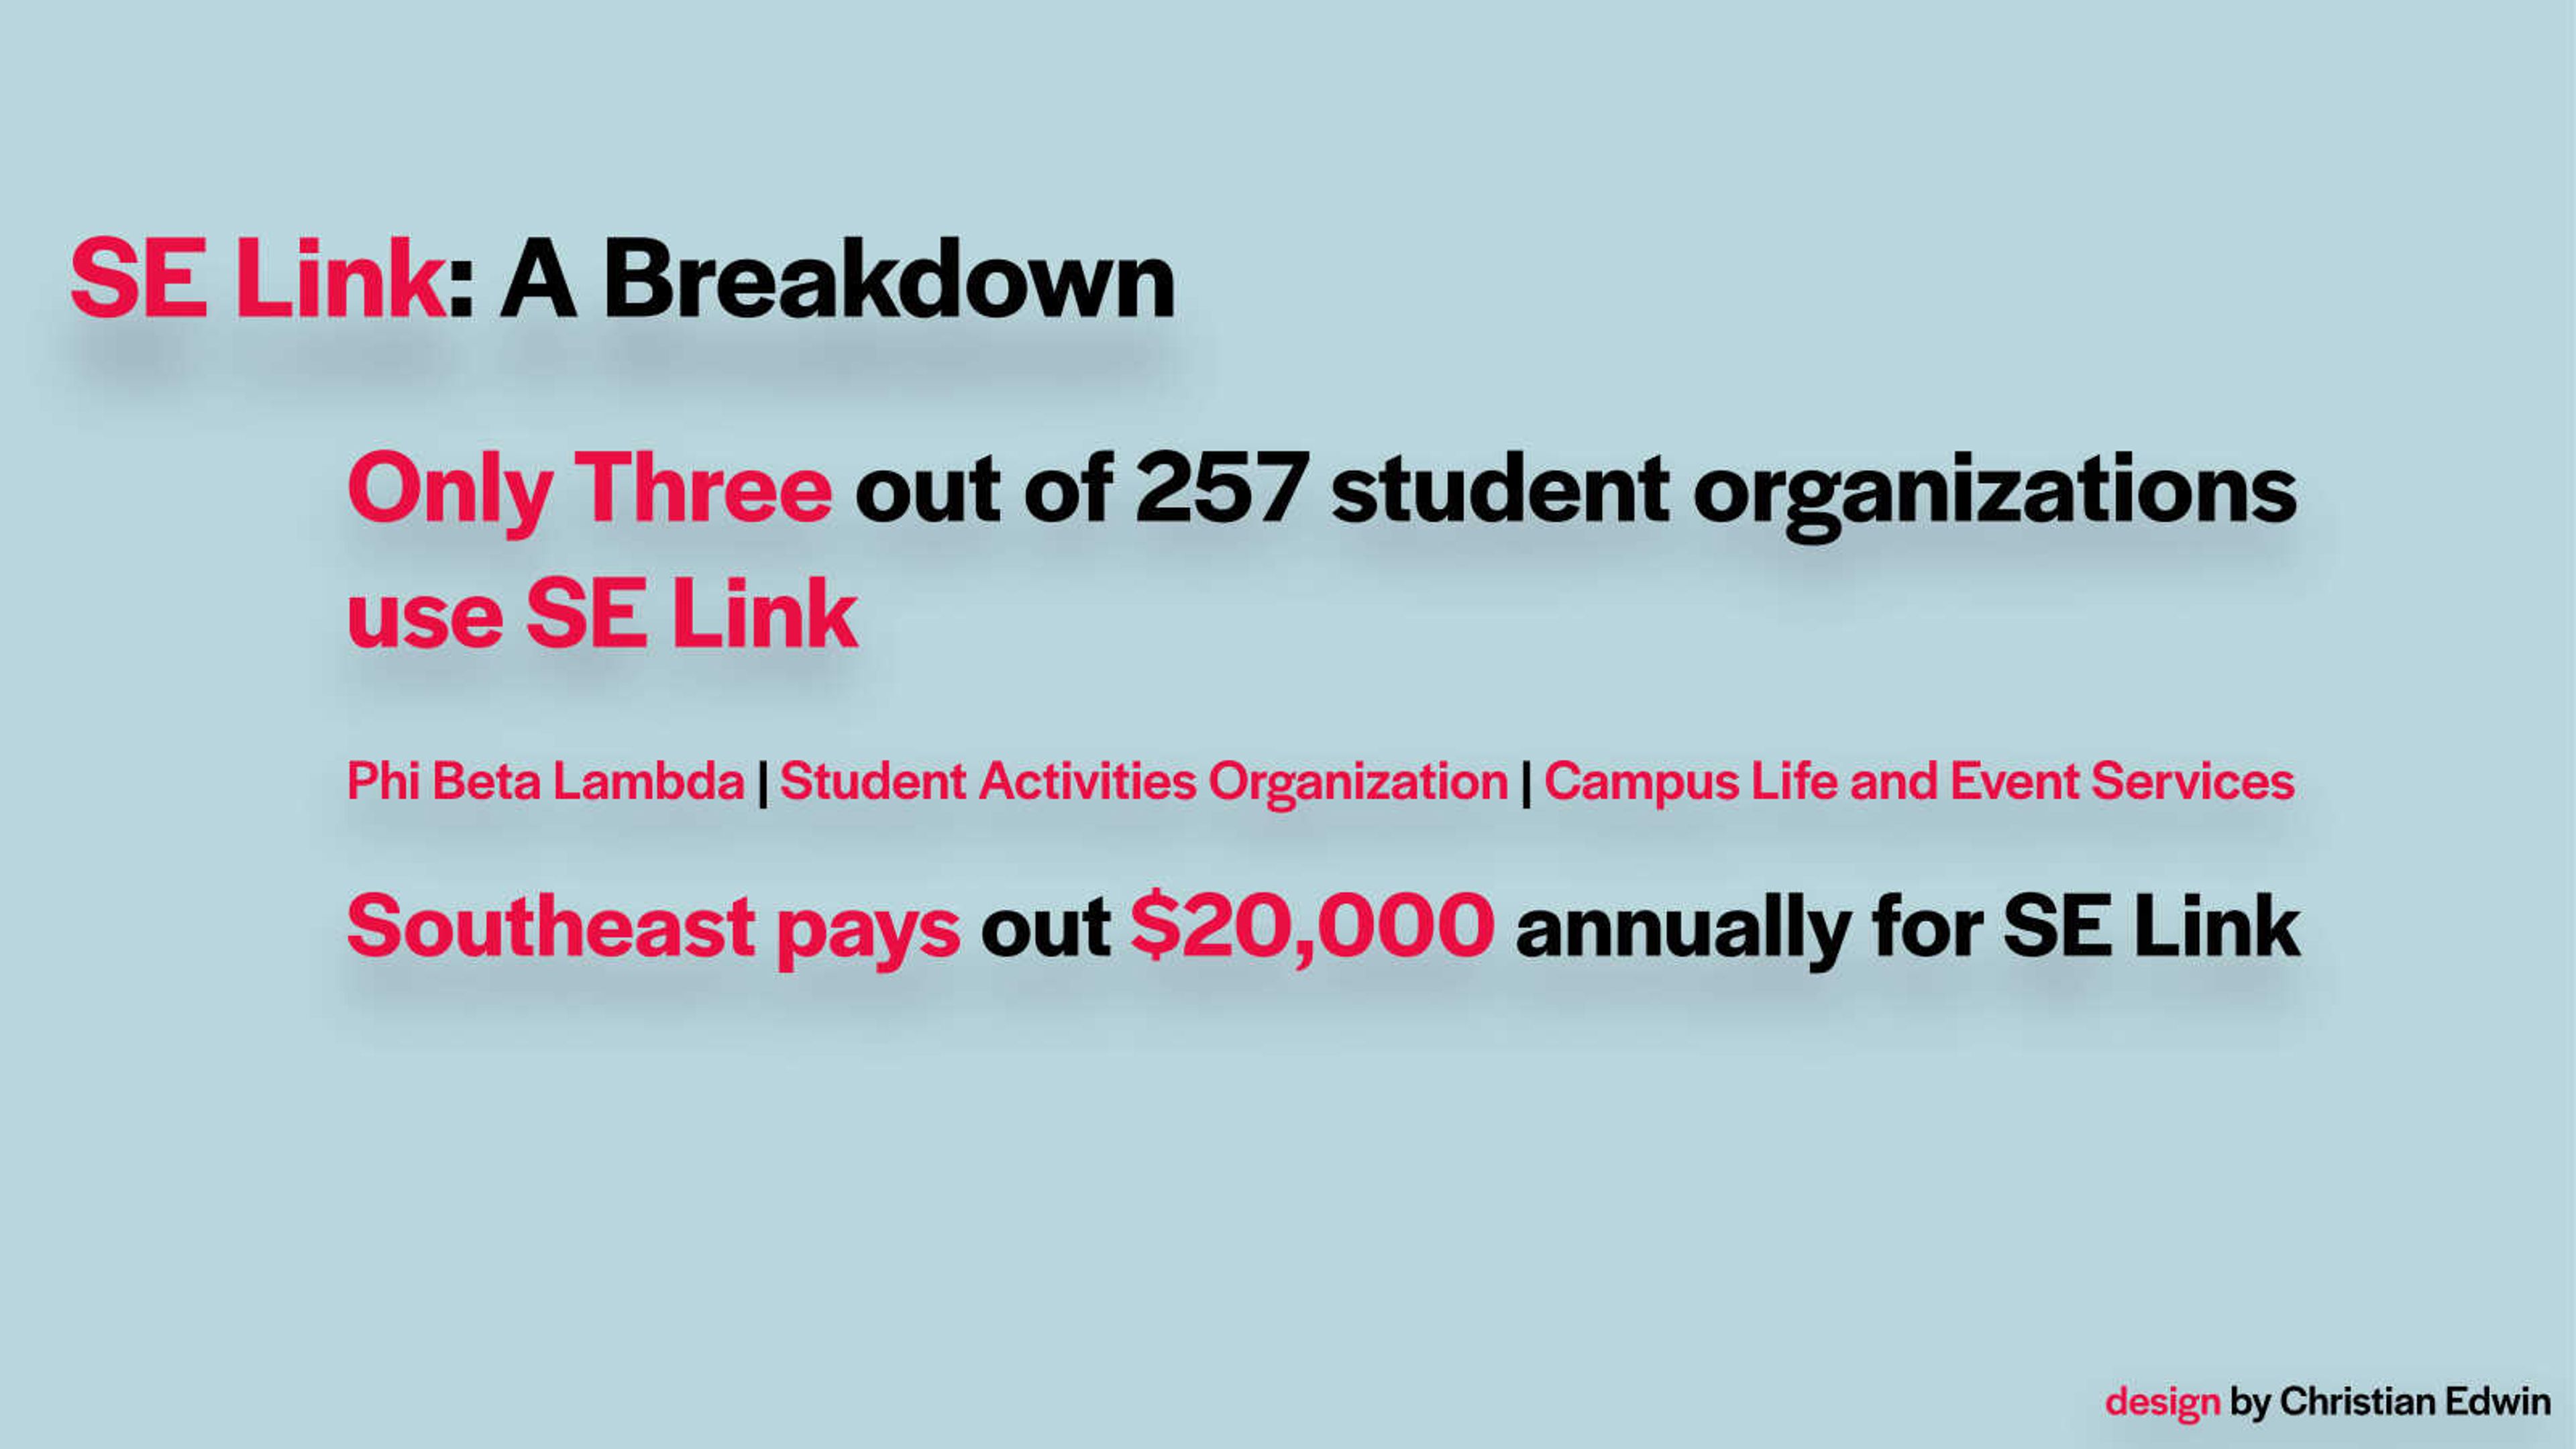 Student organizations website unused and costly